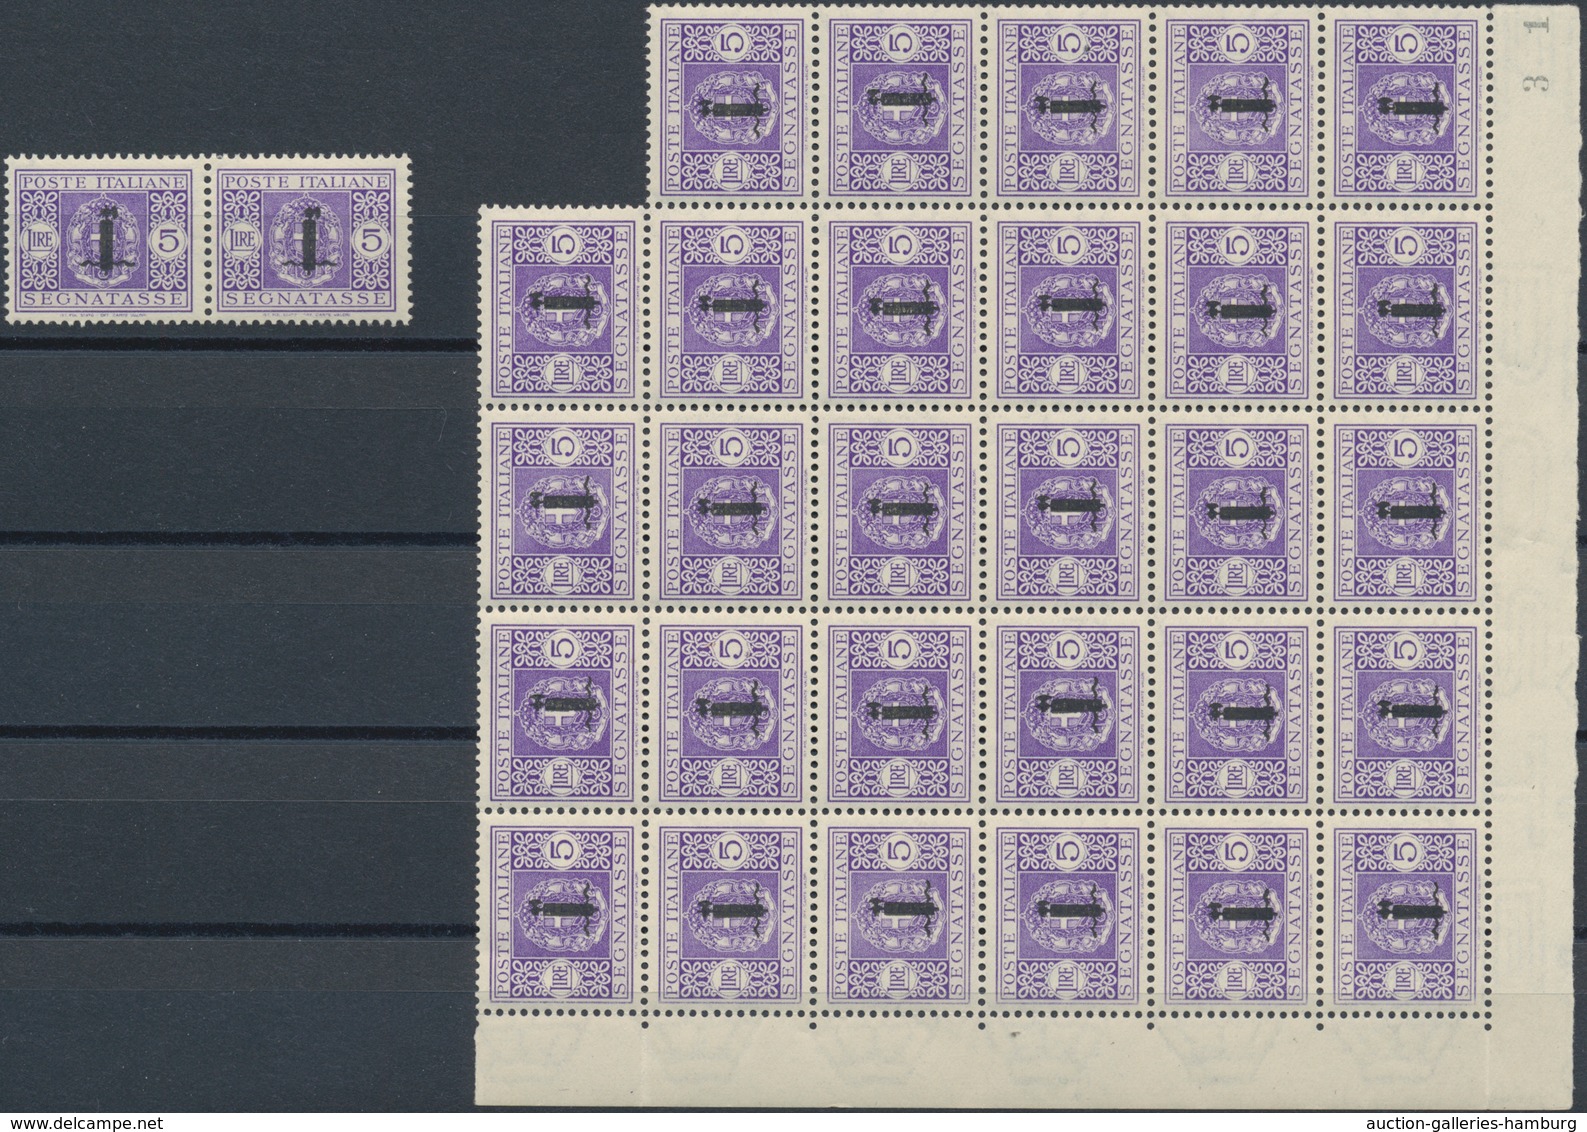 Italien: 1944, Republika Sociale "G.N.R." Issue 5 Lire Violet 31 Stamps Mint Never Hinged Large Bloc - Ohne Zuordnung